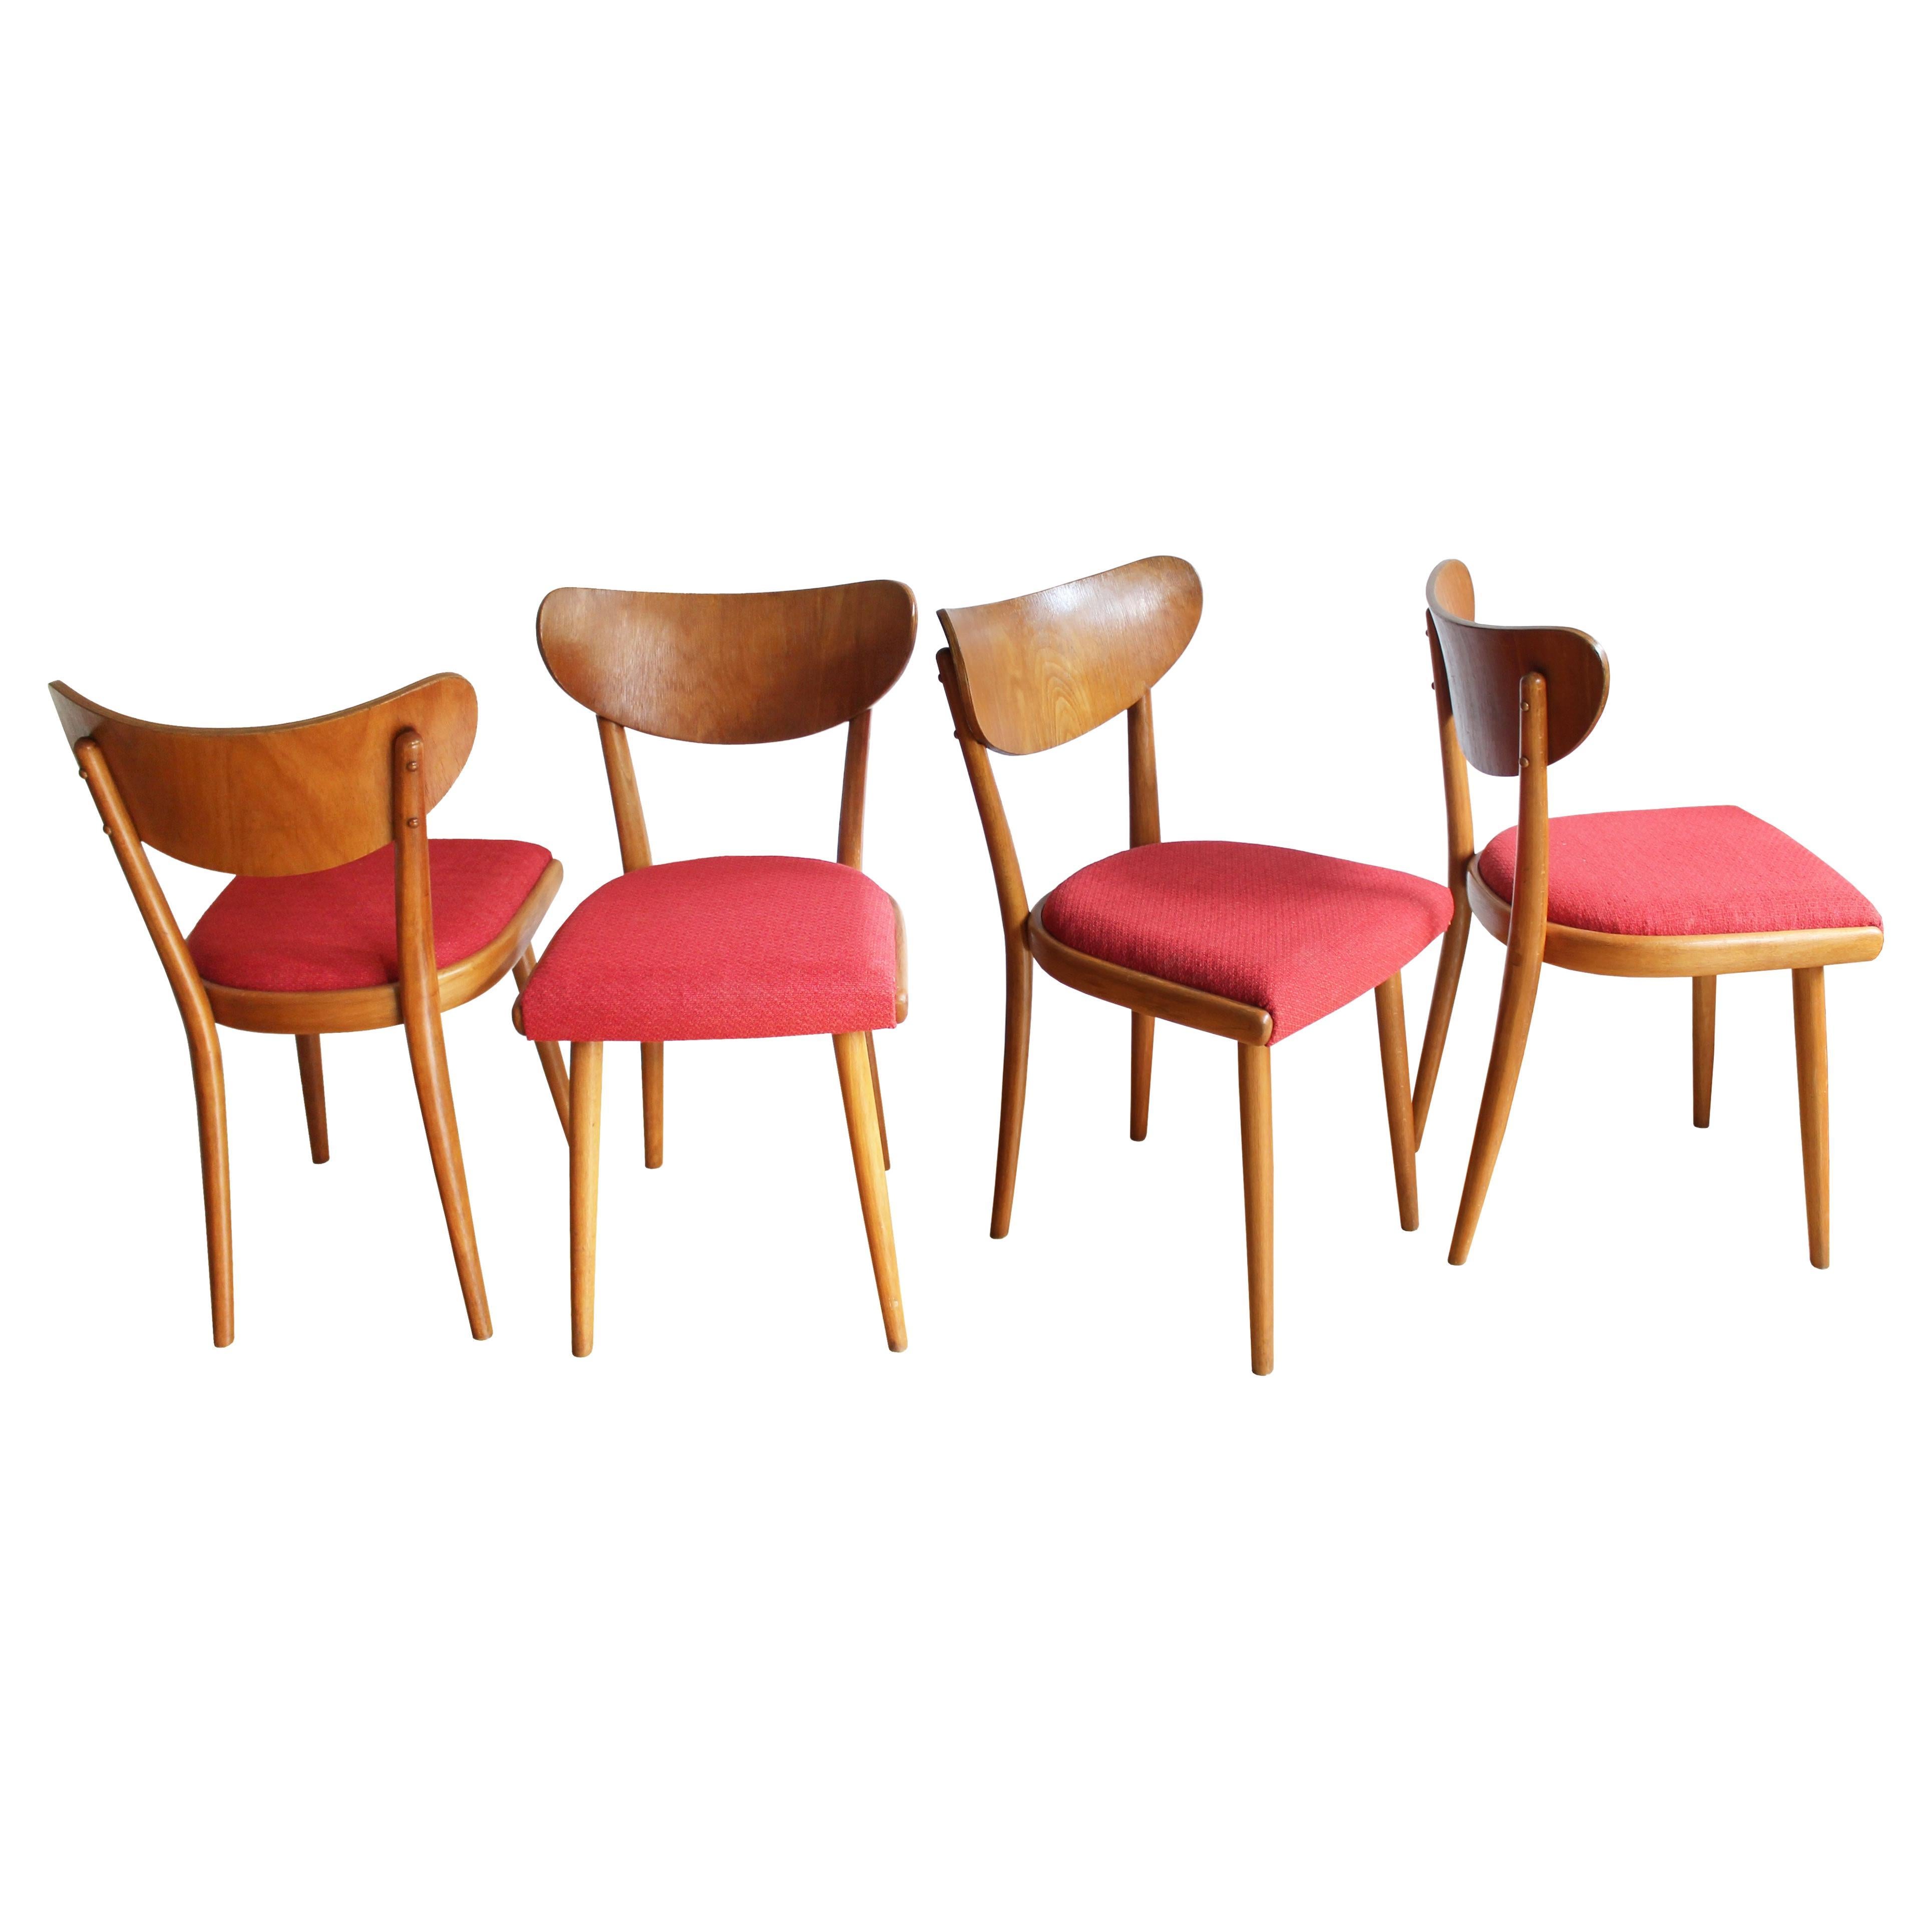 Set of Four 1950's Dining Chairs by Thonet For Sale